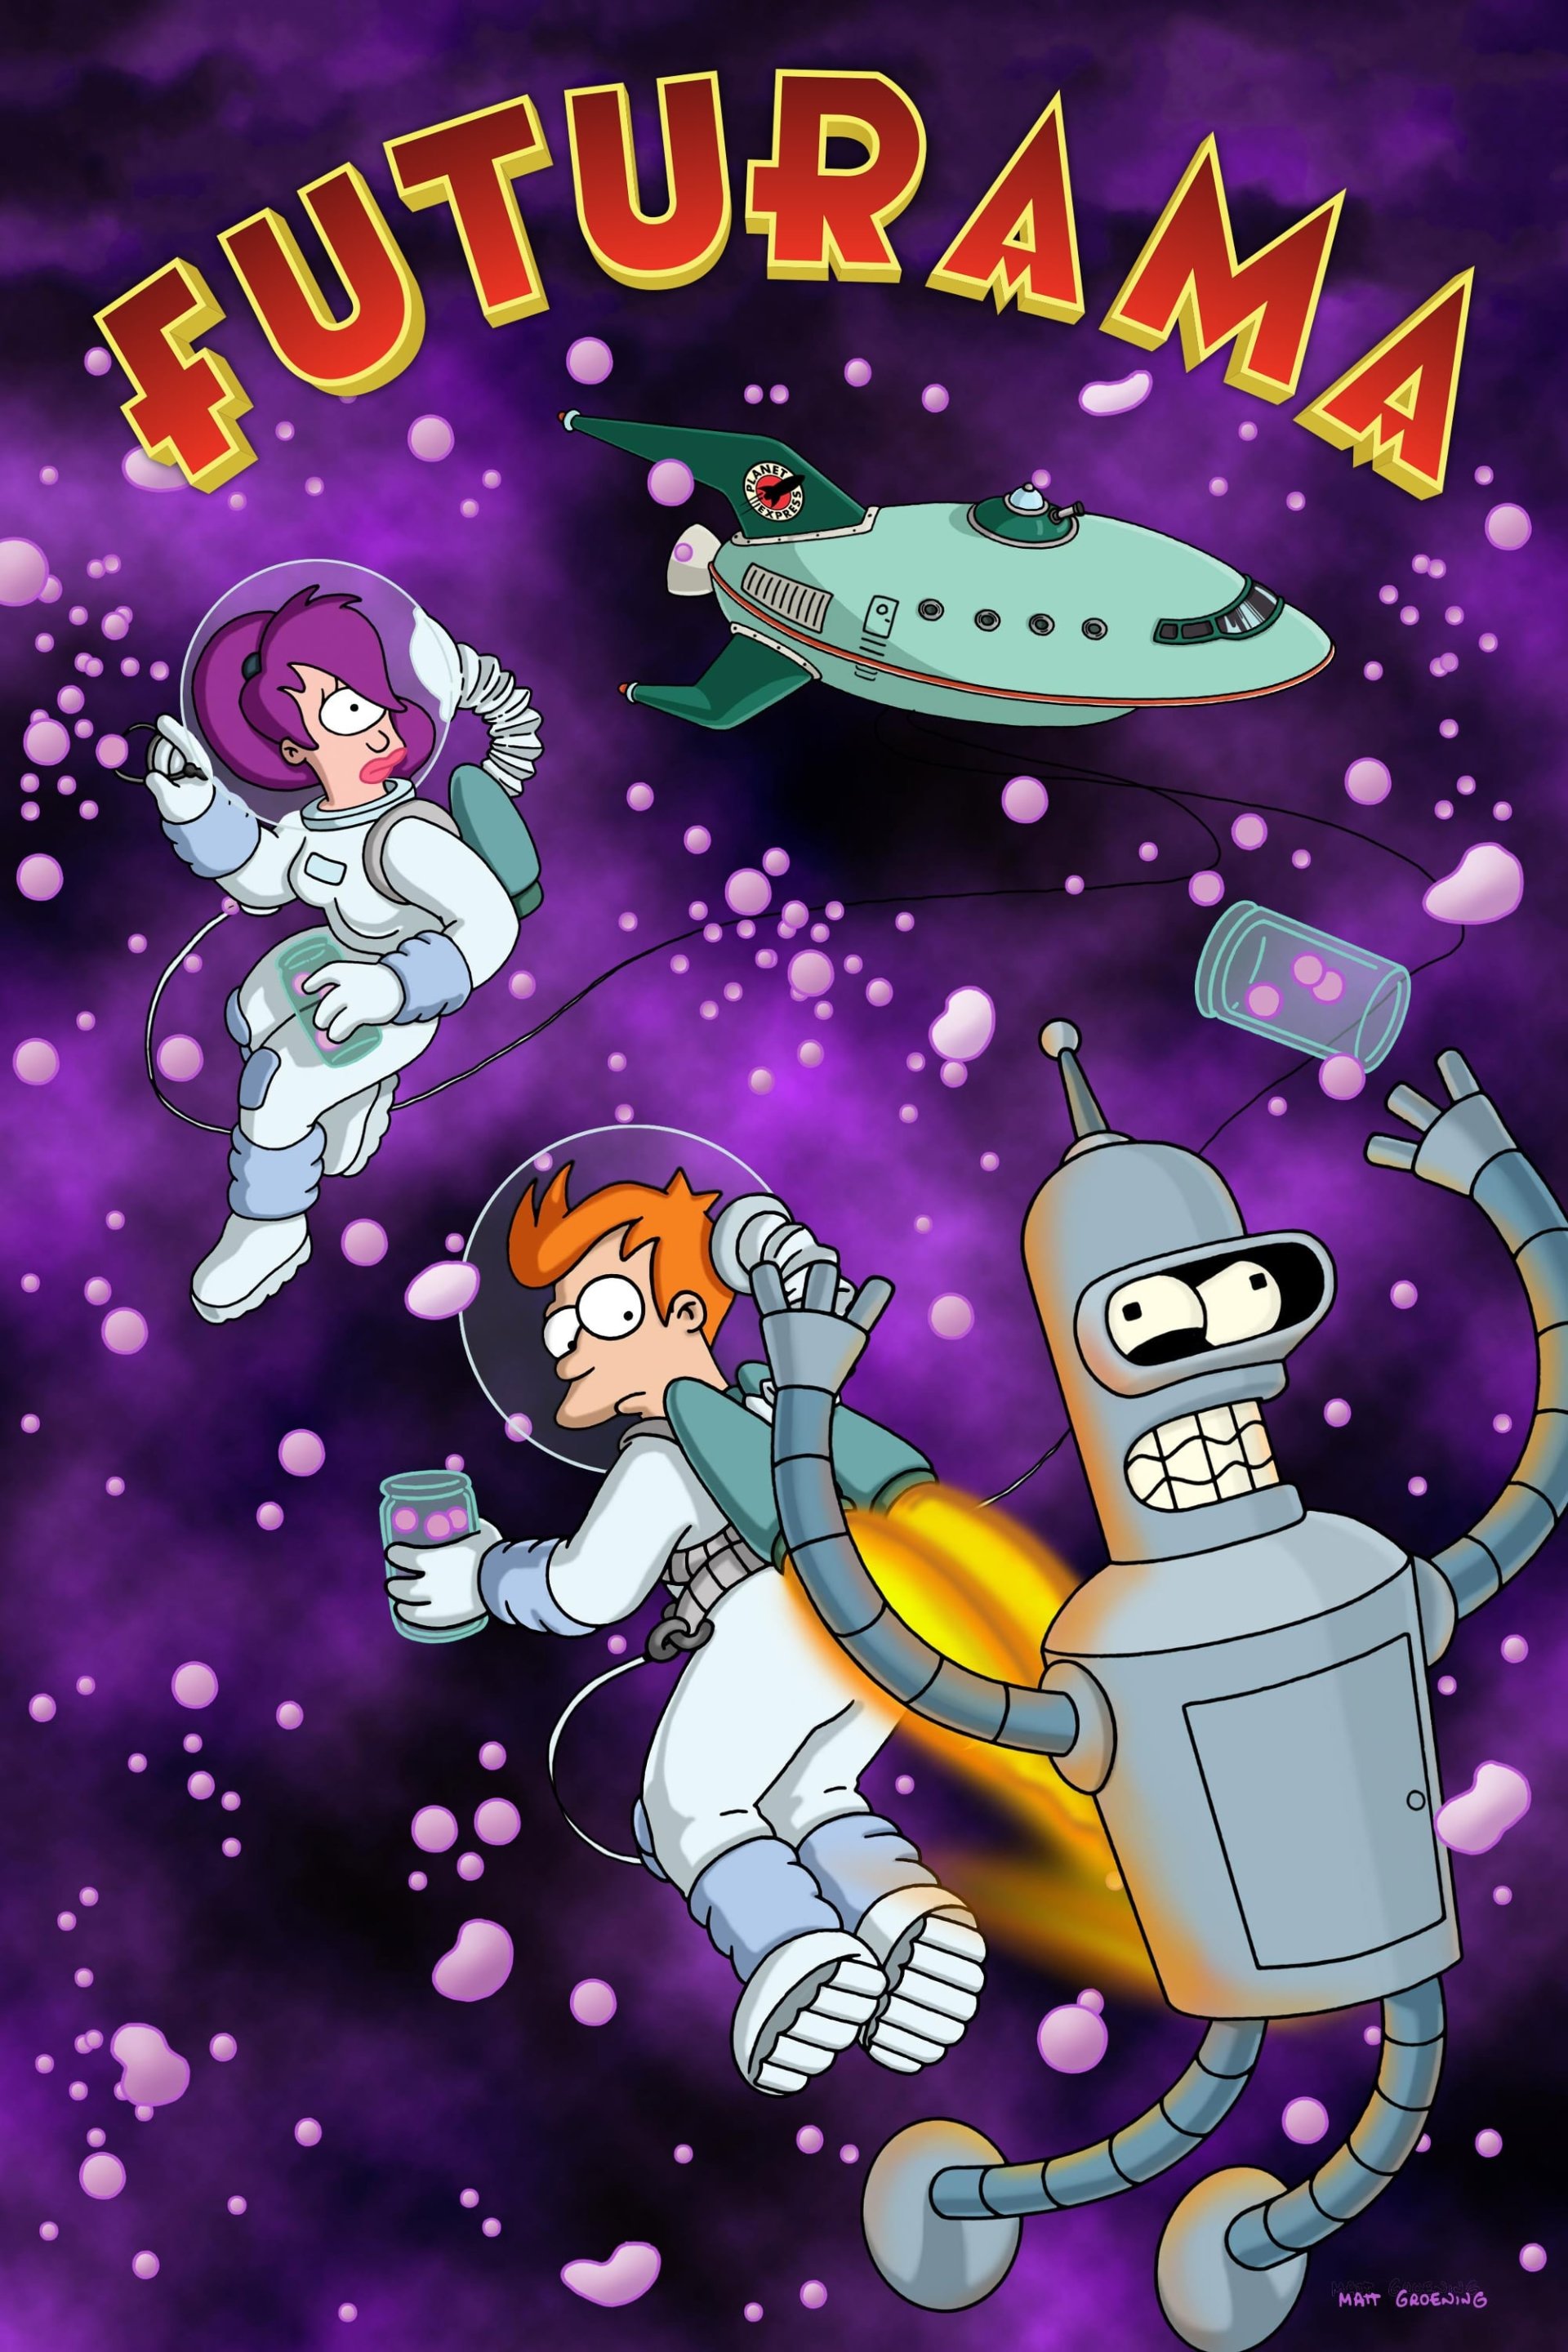 Futurama TV Show Poster ID 407107 Image Abyss